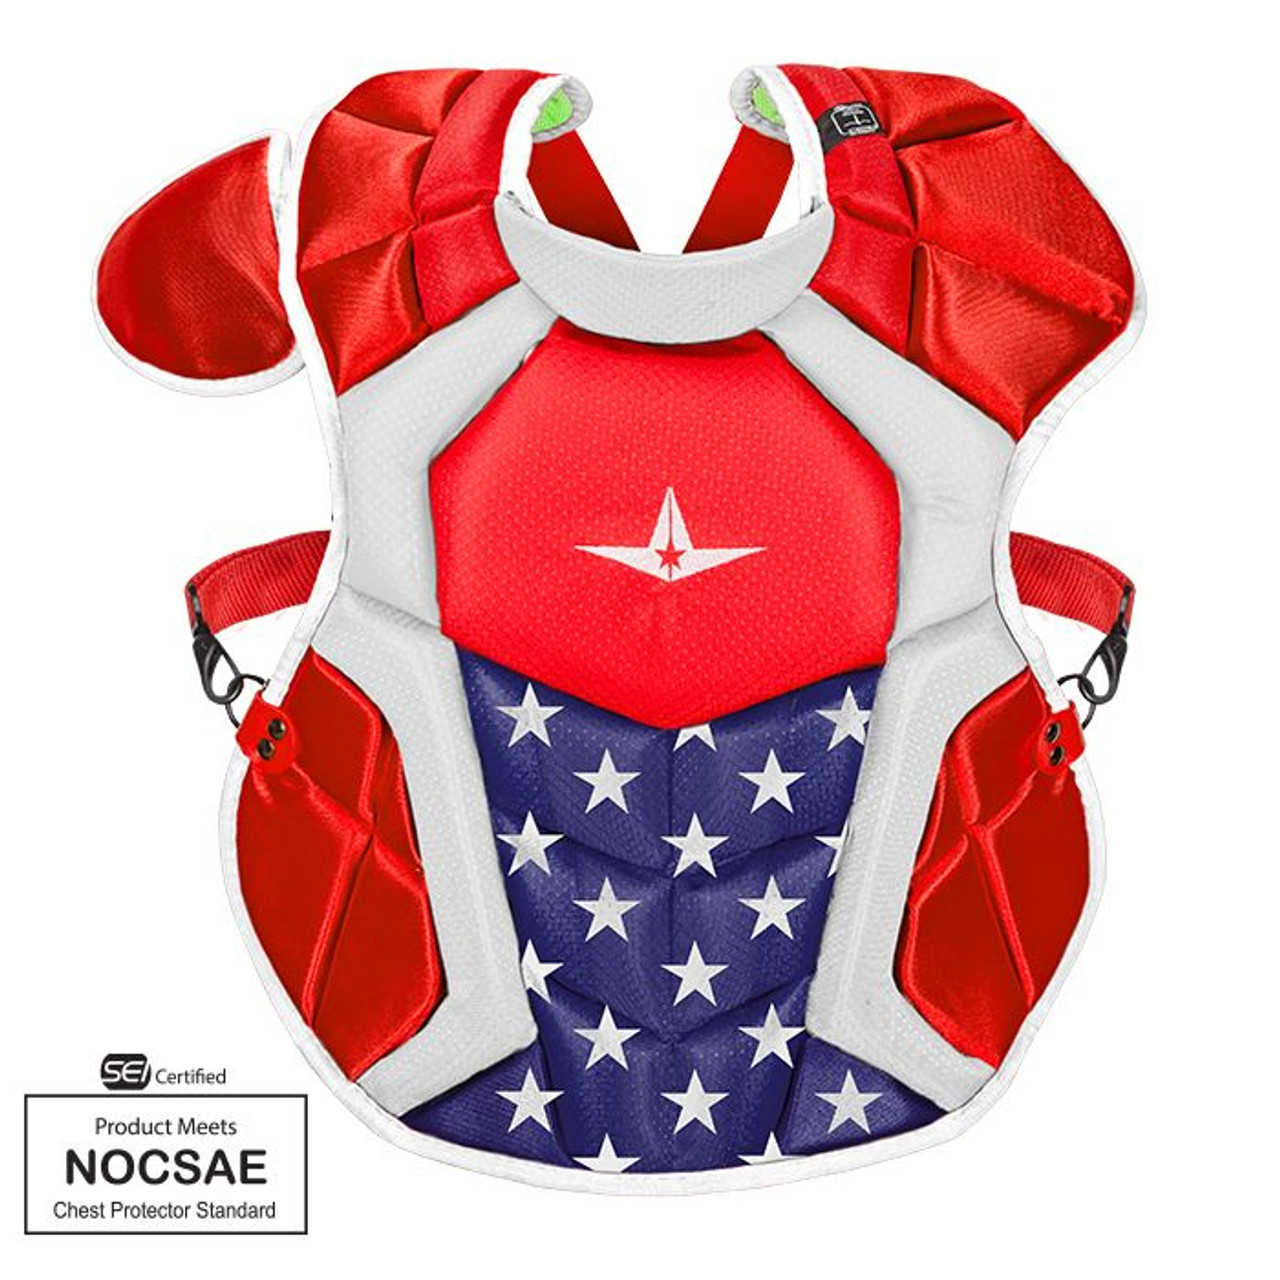 All-Star Youth USA Axis Pro System 7 Series Catcher's Kit CKCC912S7XUSA (2018)